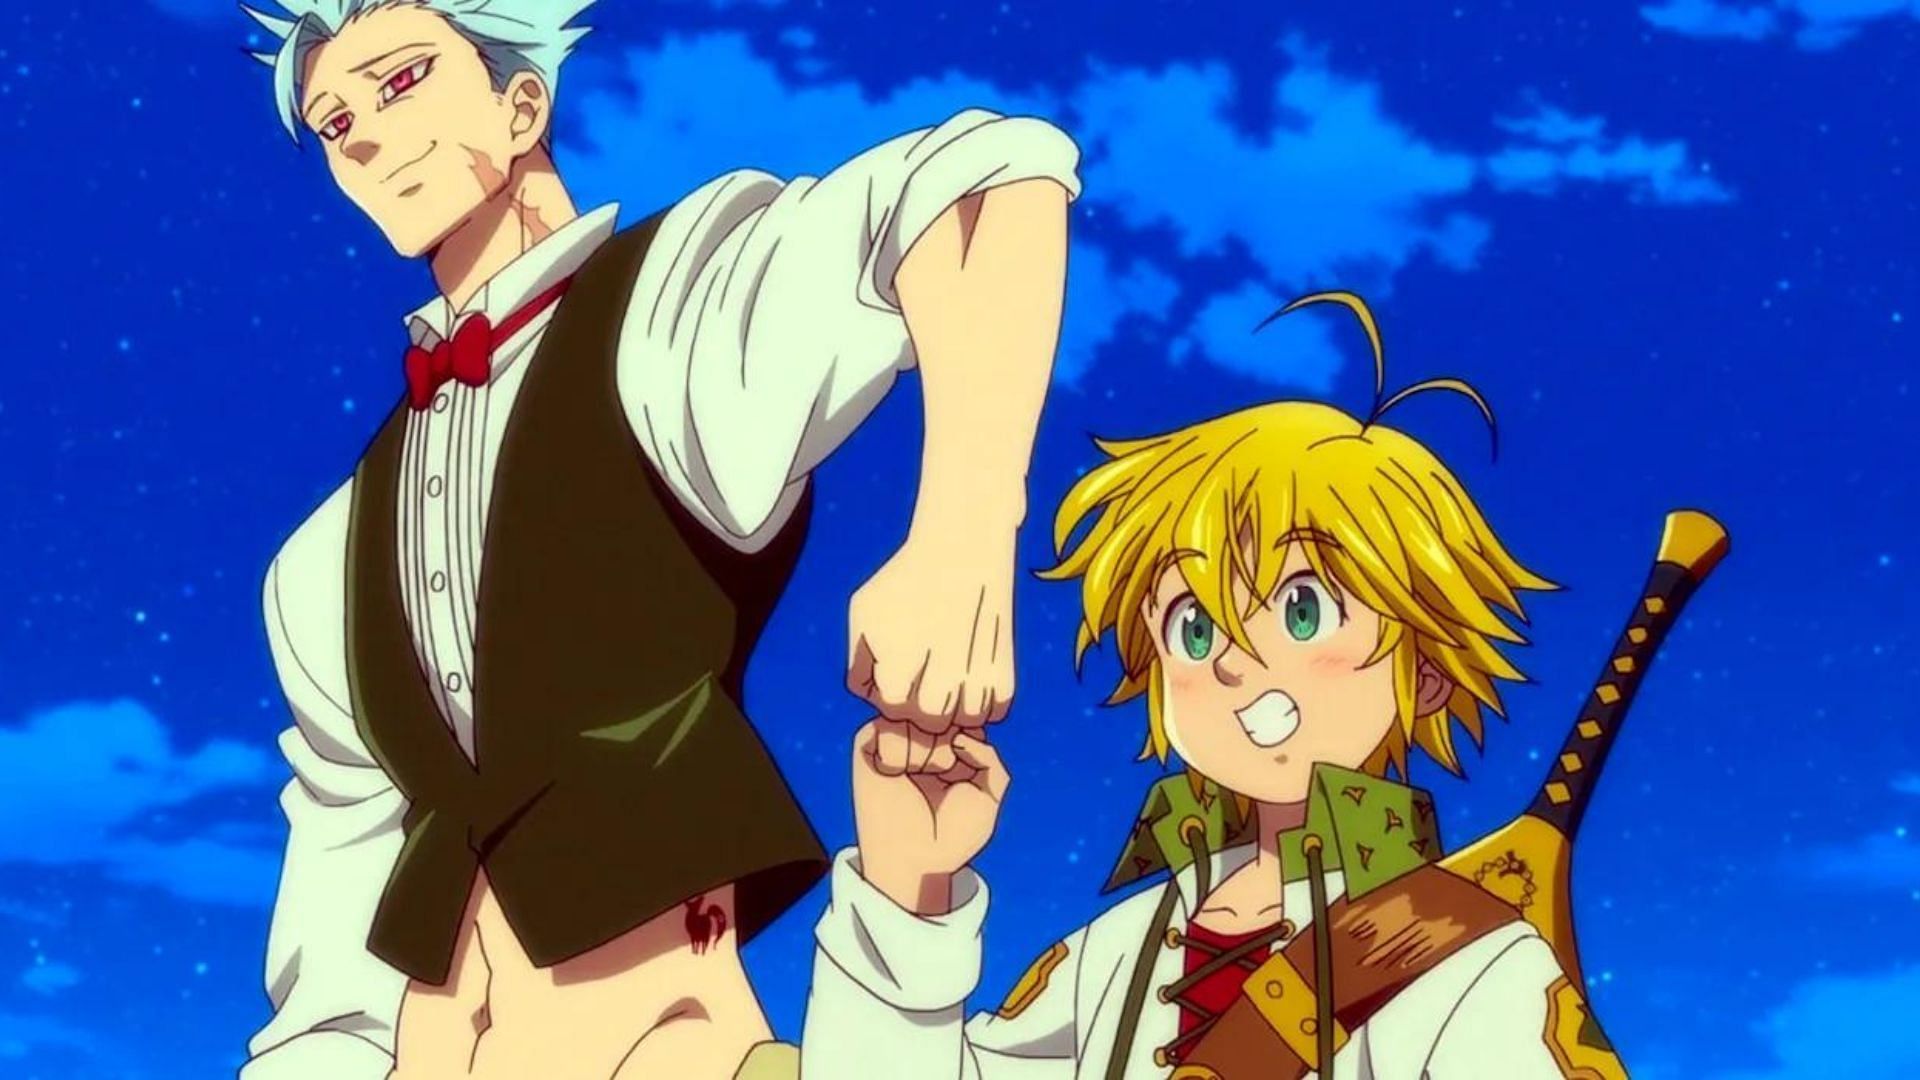 Meliodas and Ban as seen in the anime (Image via A-1 Pictures)